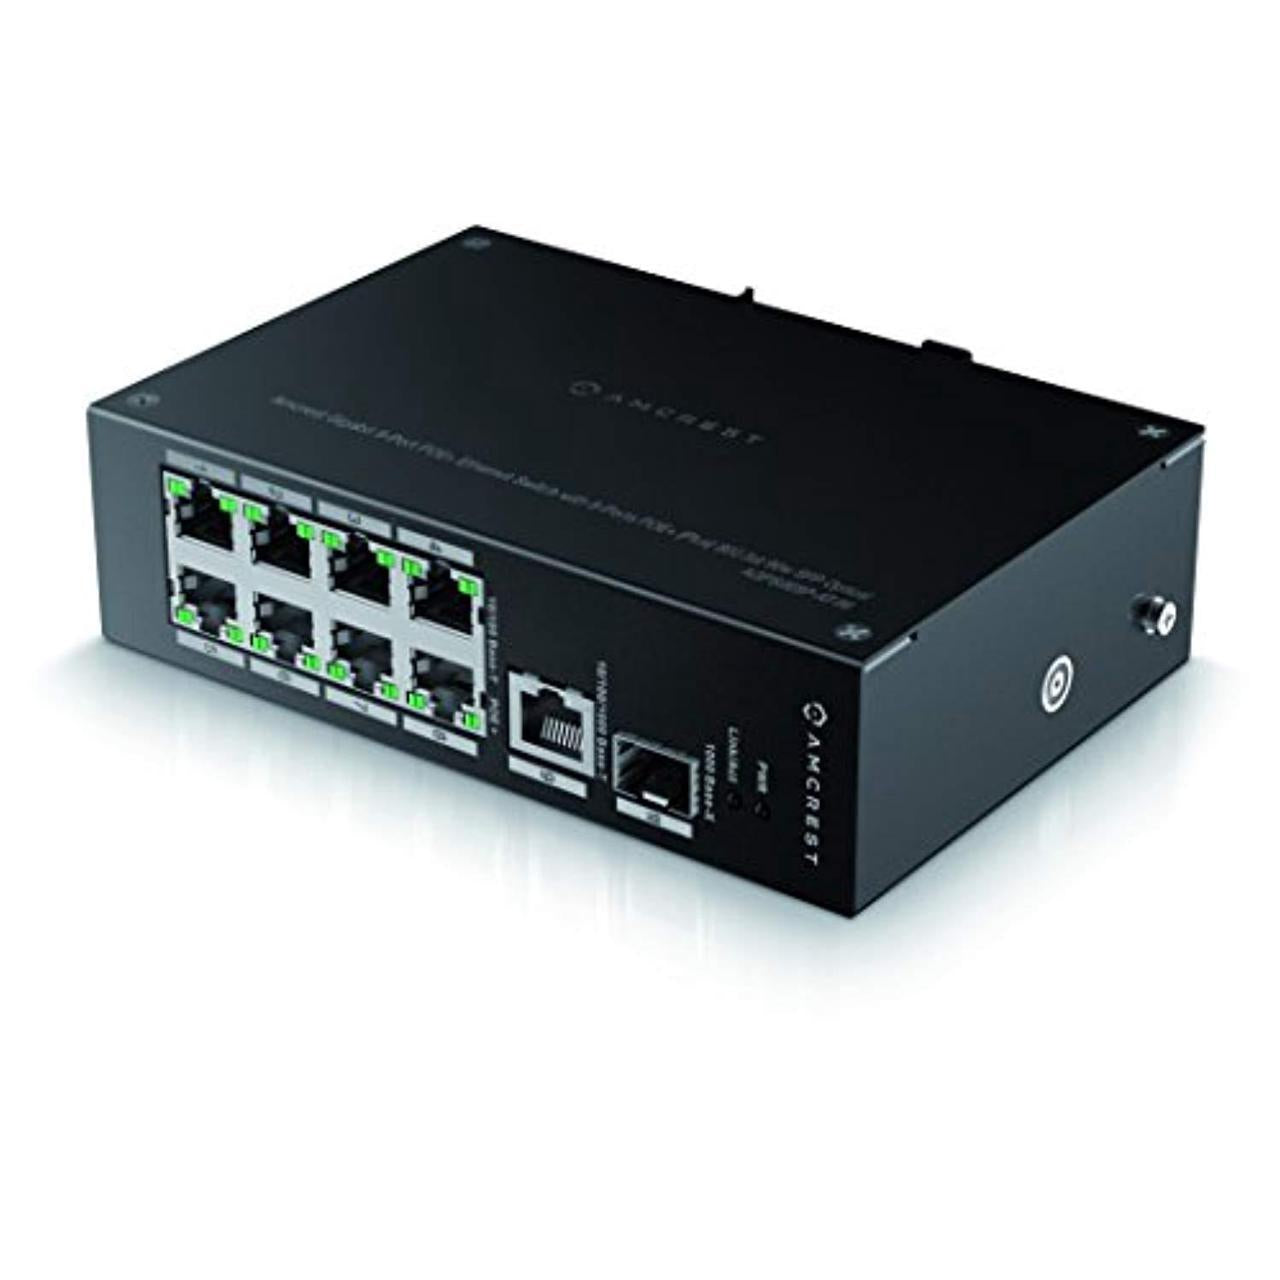 Amcrest 8-Port POE+ Power Over Ethernet POE Switch with Metal